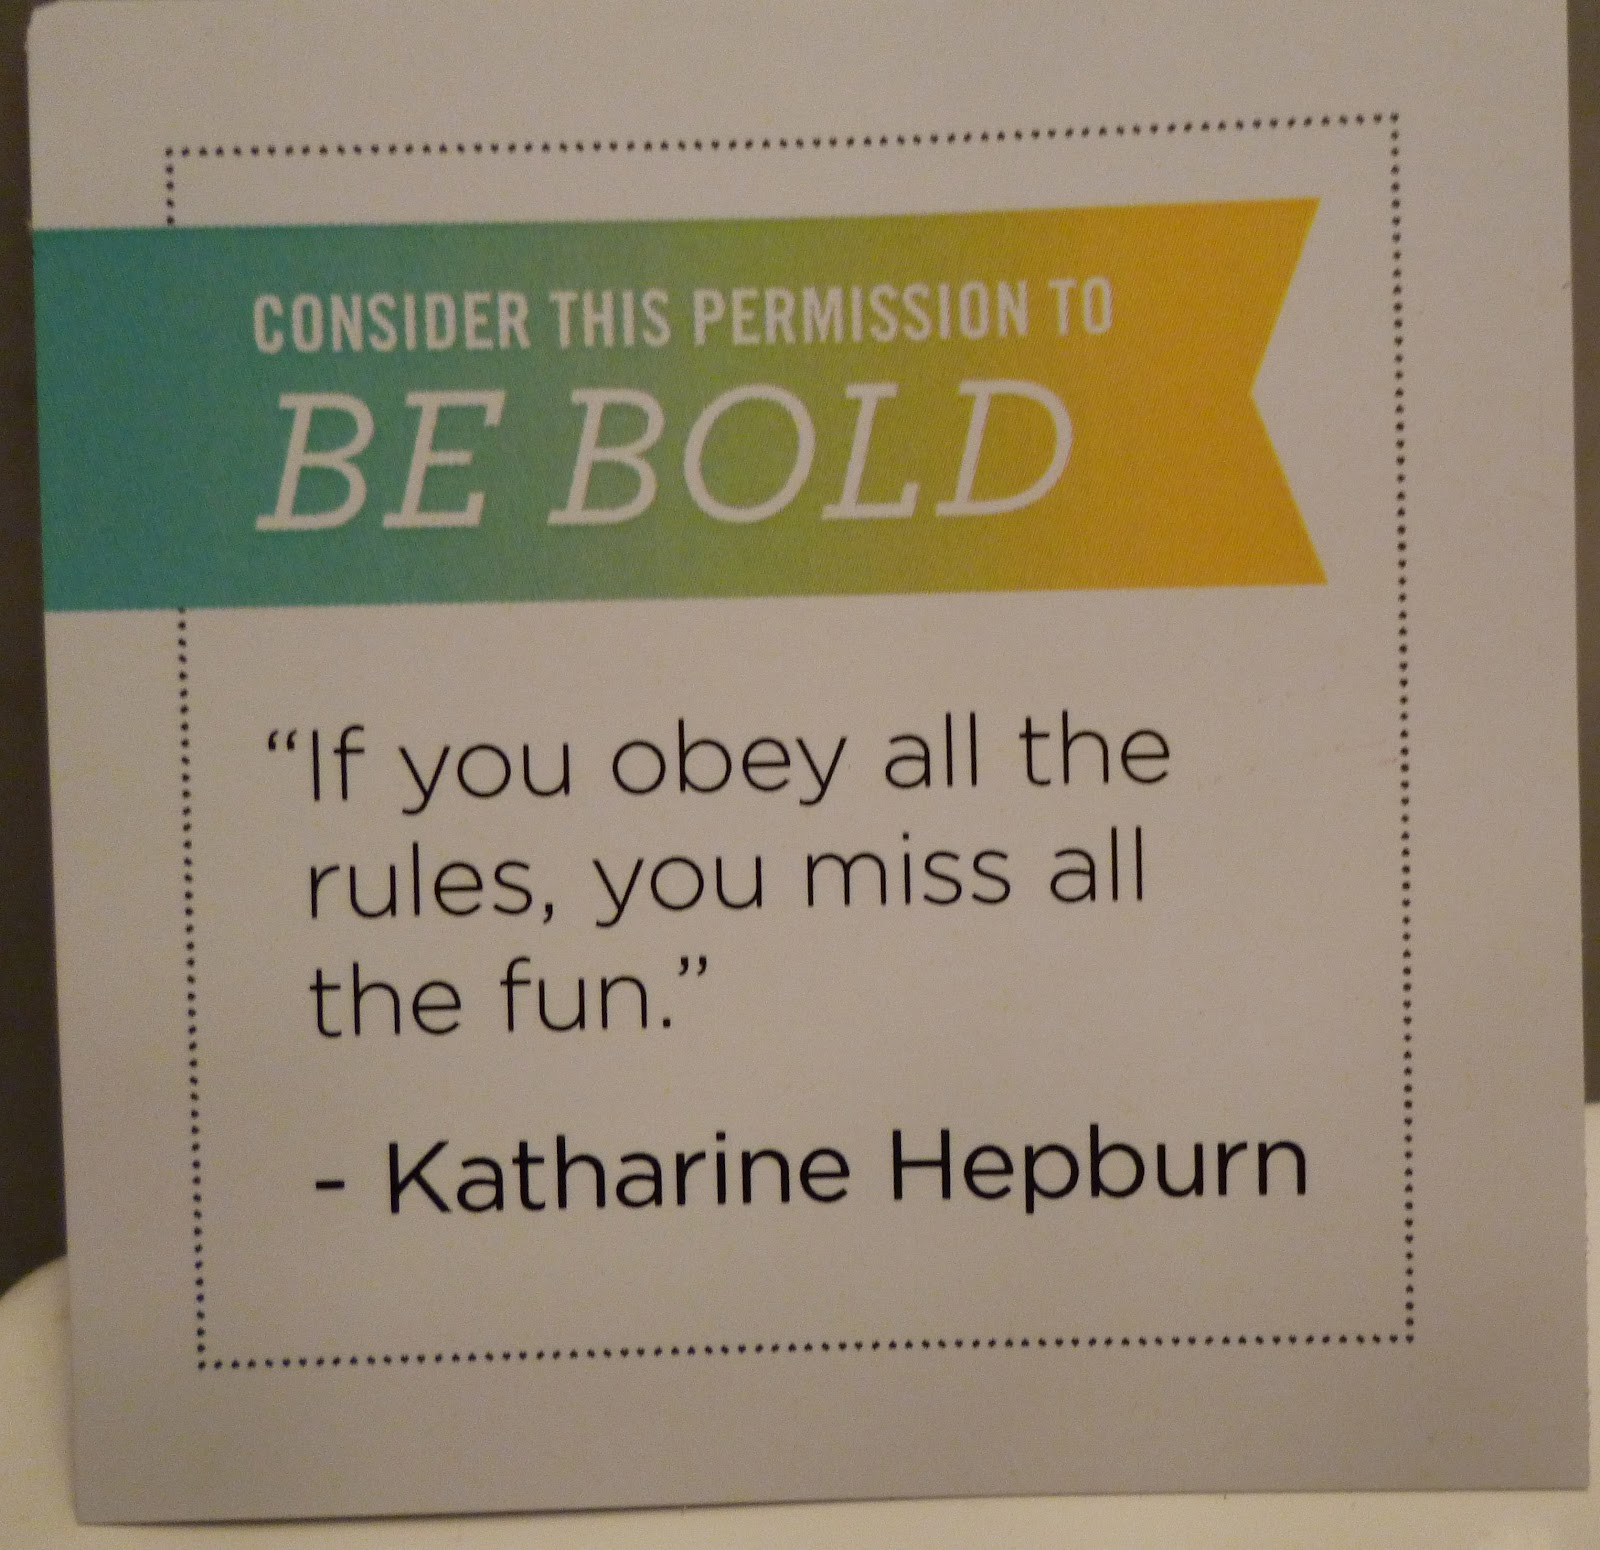 Consider this your permission to BE BOLD. If you obey all the rules, you miss all the fun. Katherine Hepburn